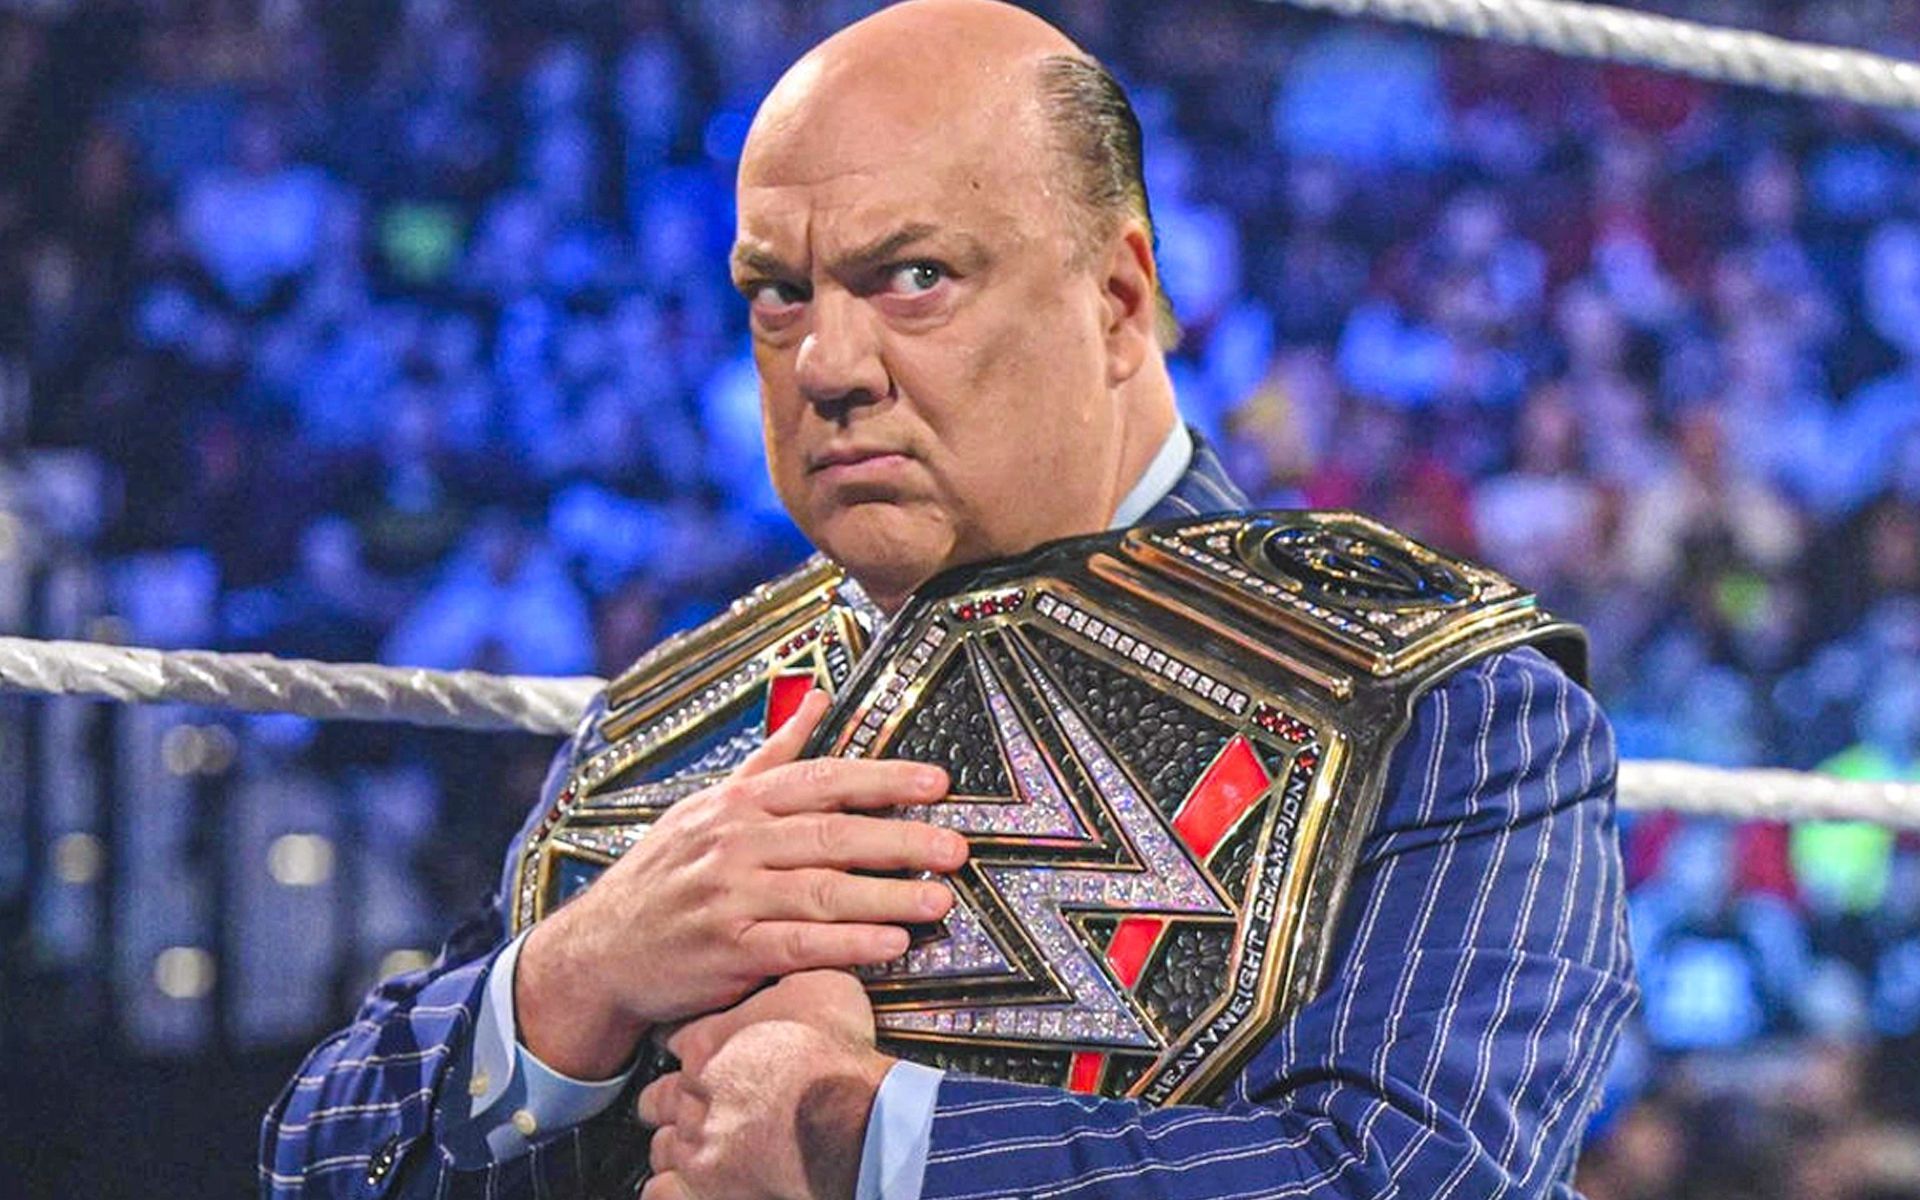 Paul Heyman is currently the Special Counsel for Roman Reigns